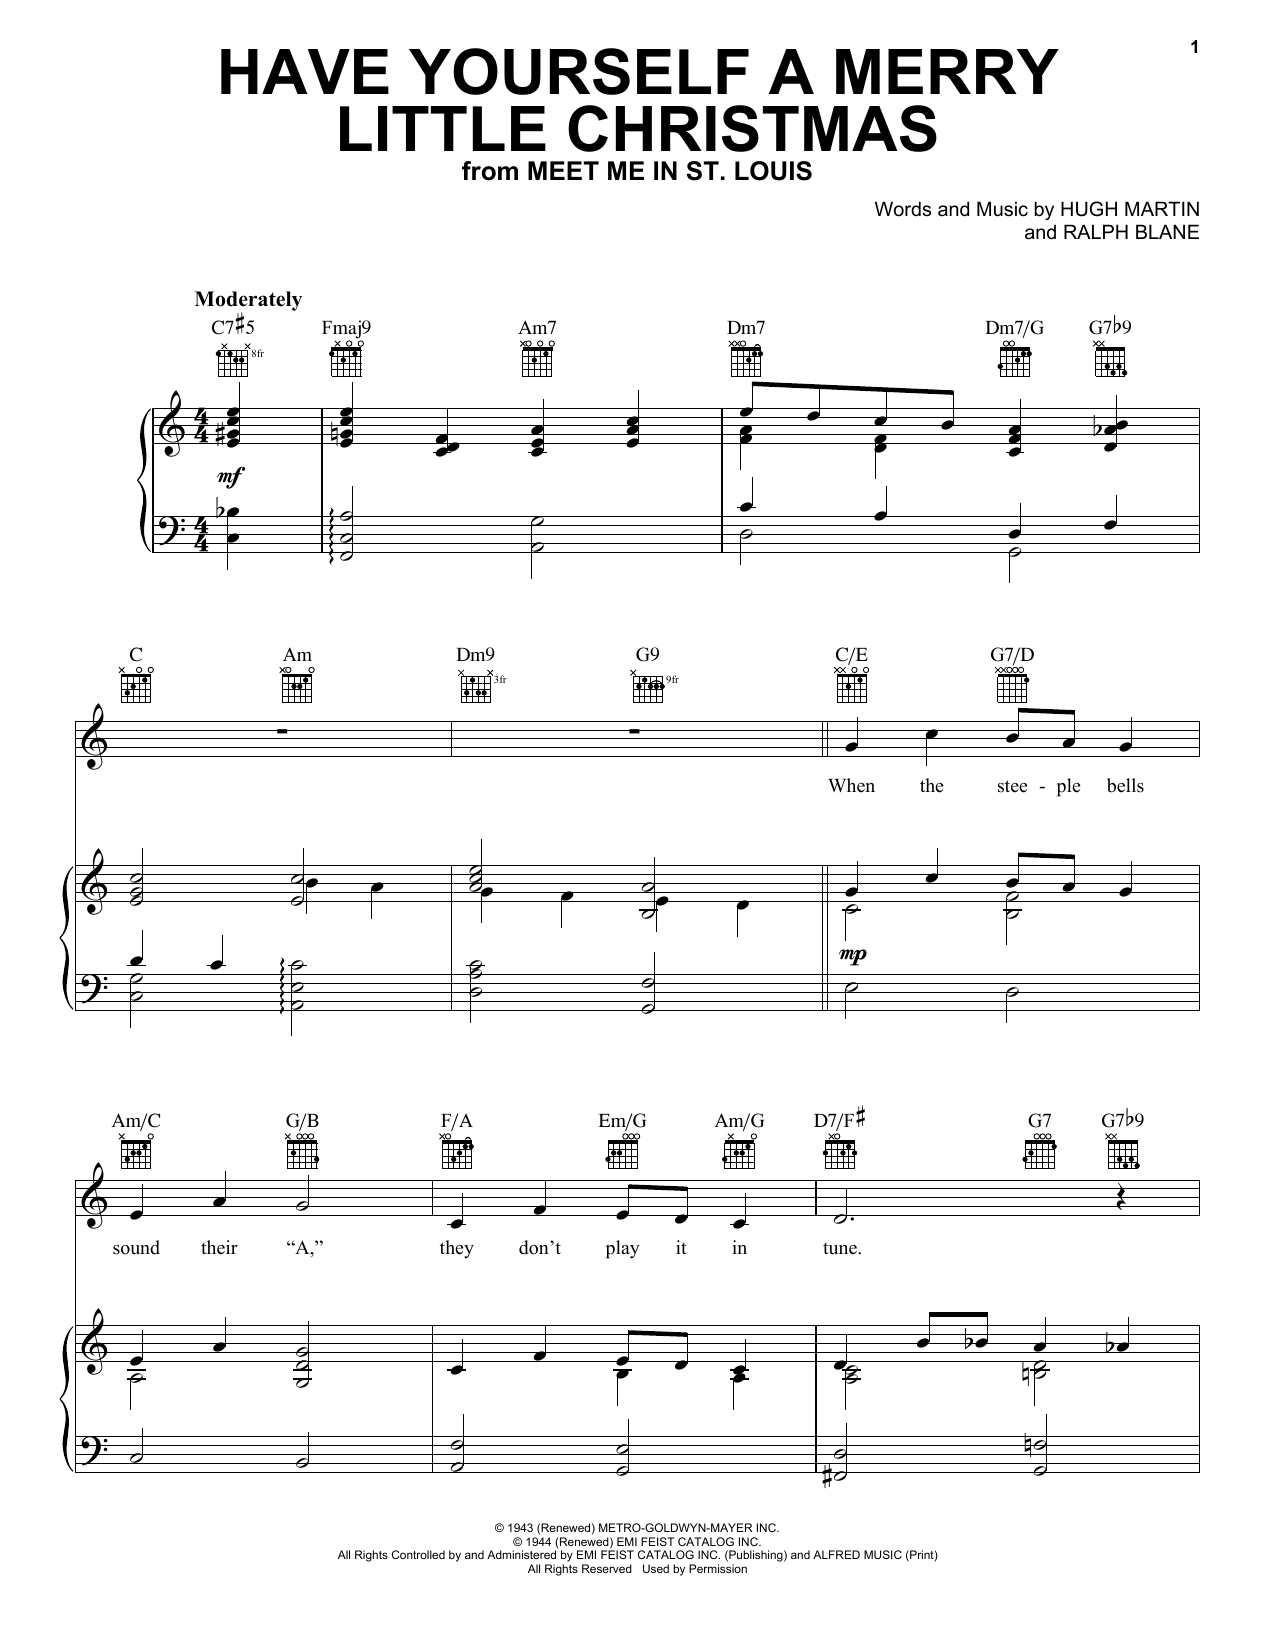 Frank Sinatra Have Yourself A Merry Little Christmas sheet music notes and chords. Download Printable PDF.